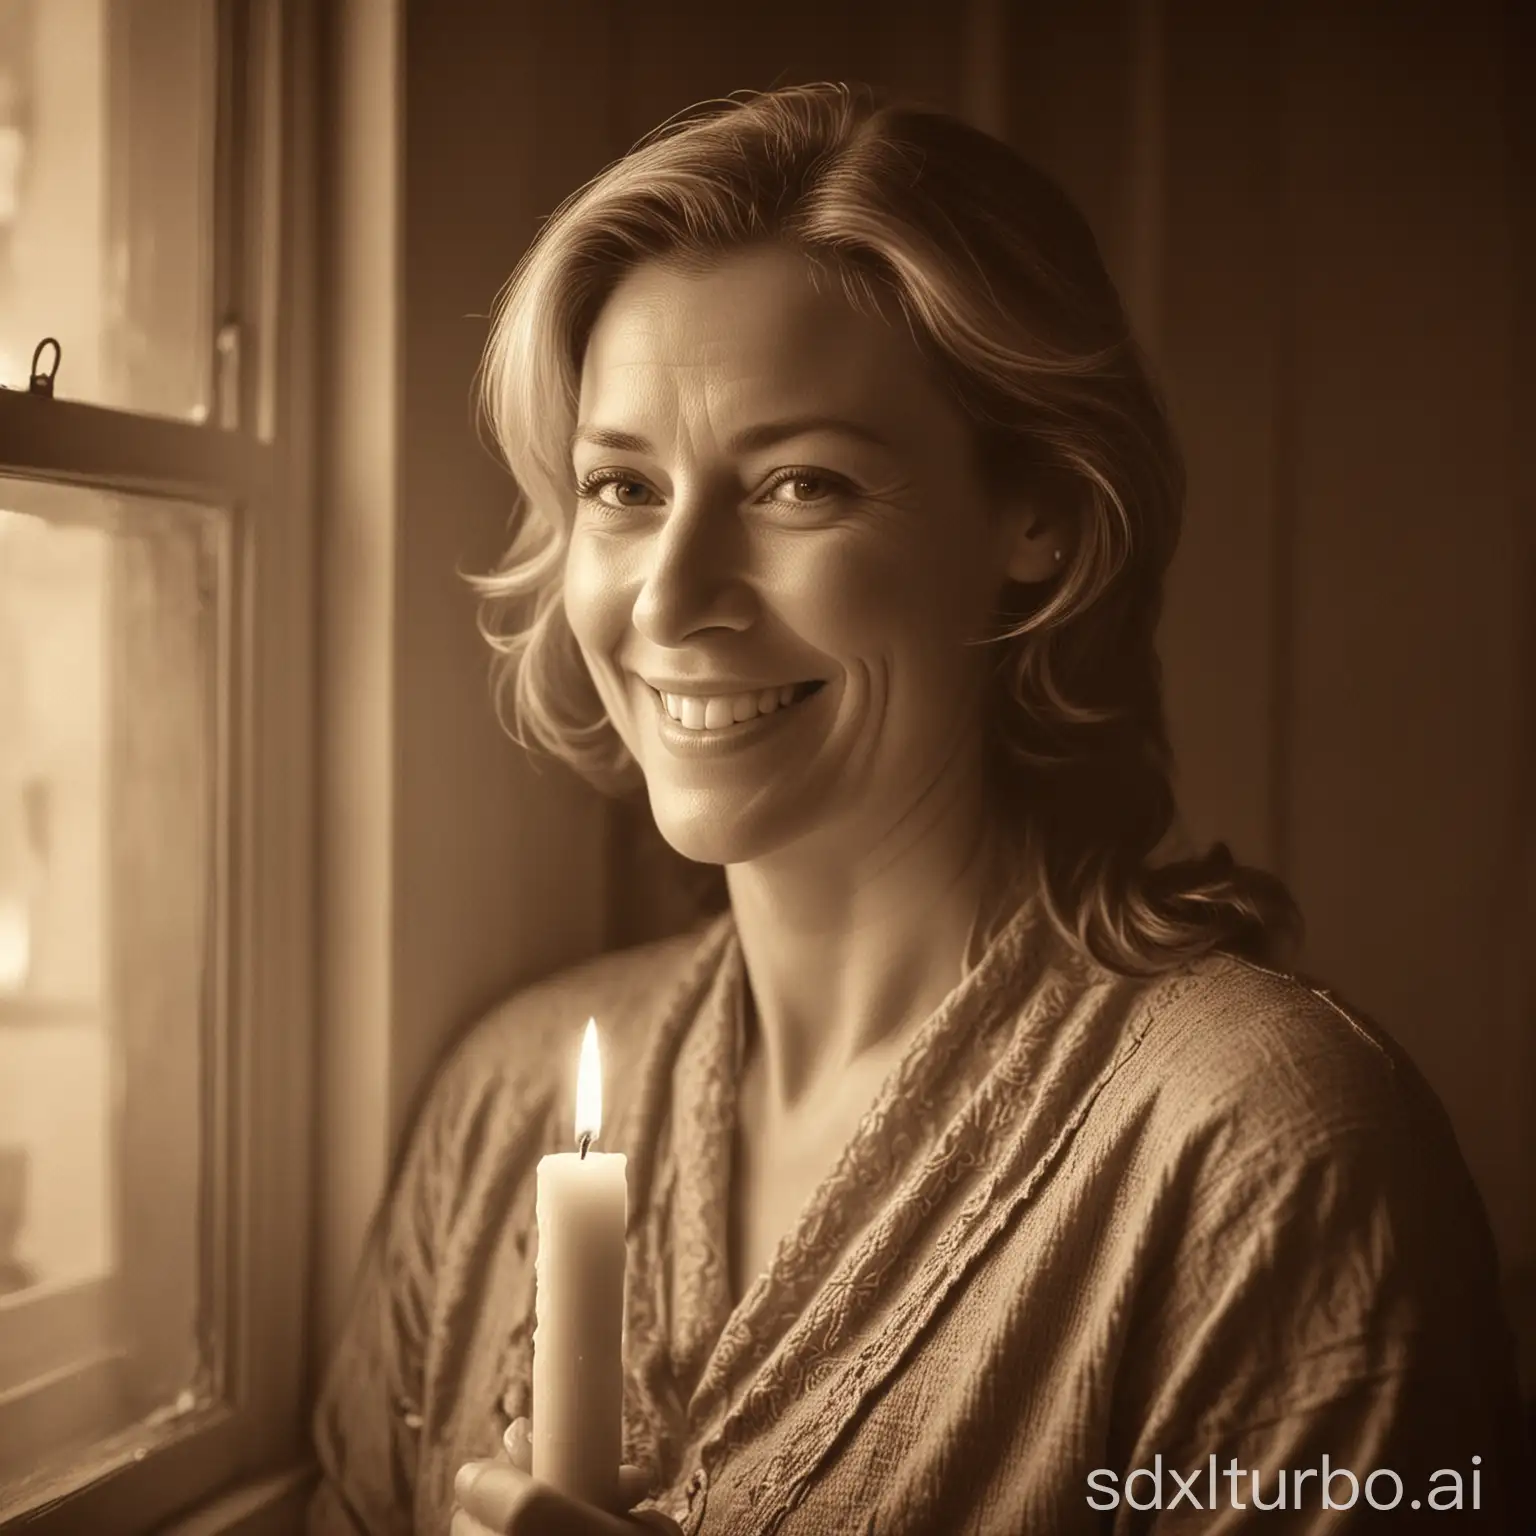 classic portrait of a smiling middle-aged woman near a window holding a candle, light getting through the window, the room is dark, sepia finishment